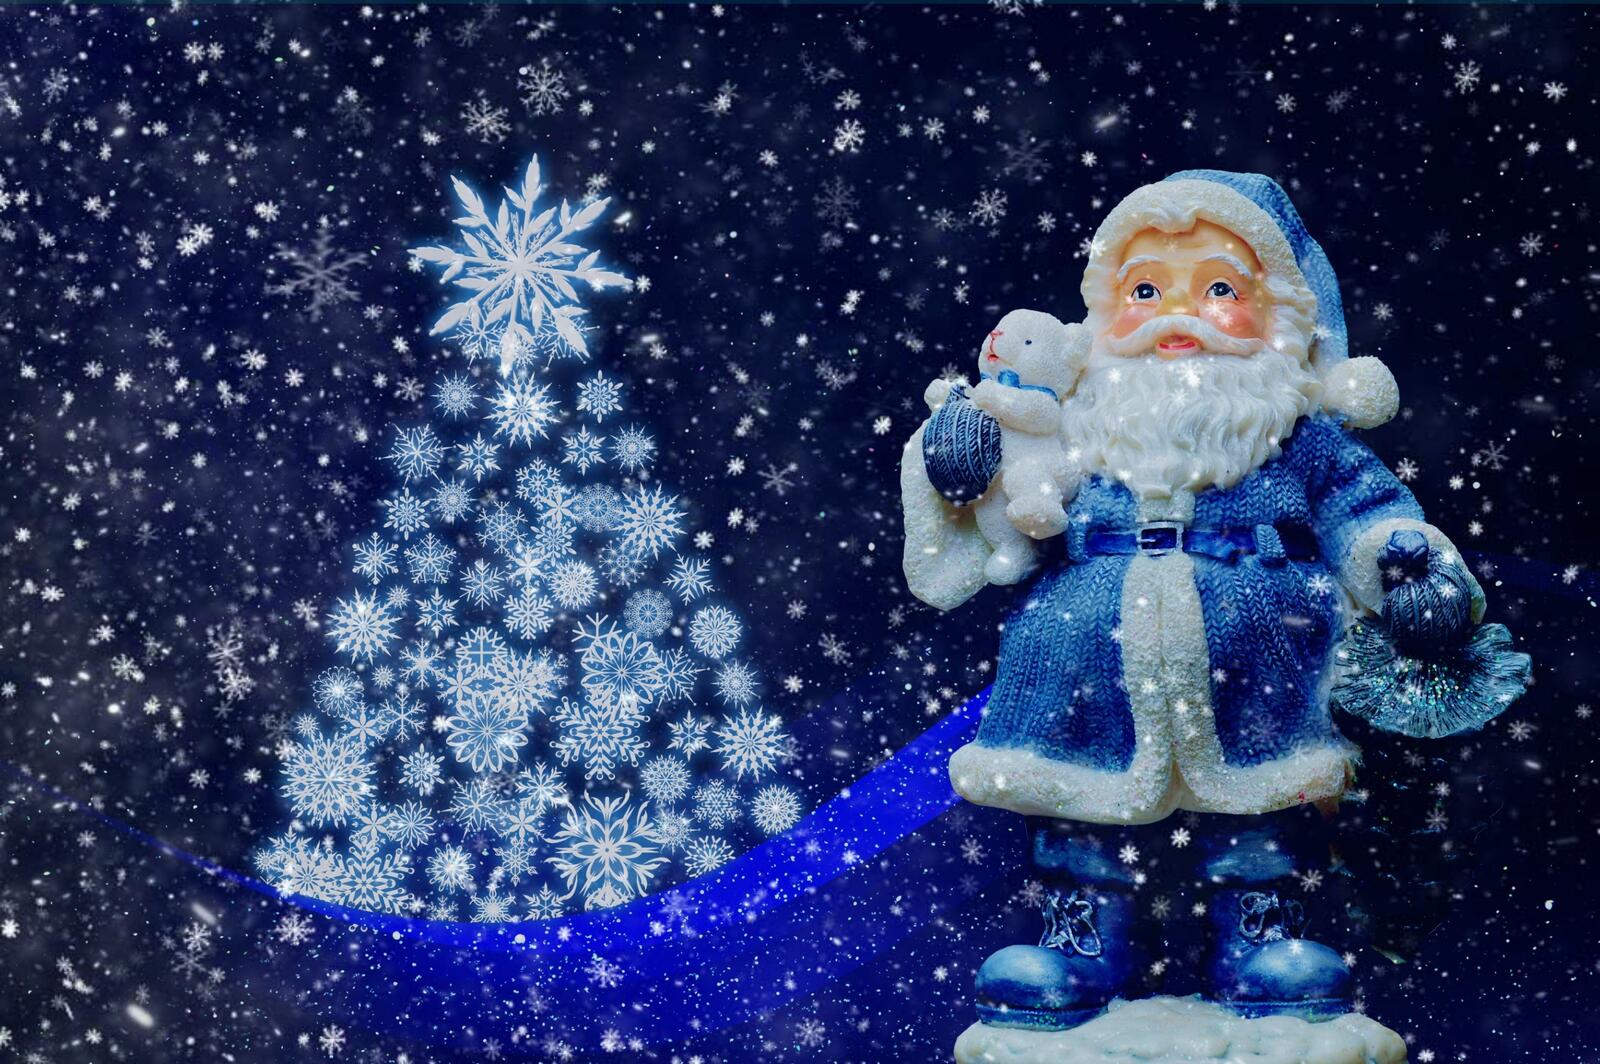 Wallpapers Christmas style Christmas decoration items Santa Claus on the desktop